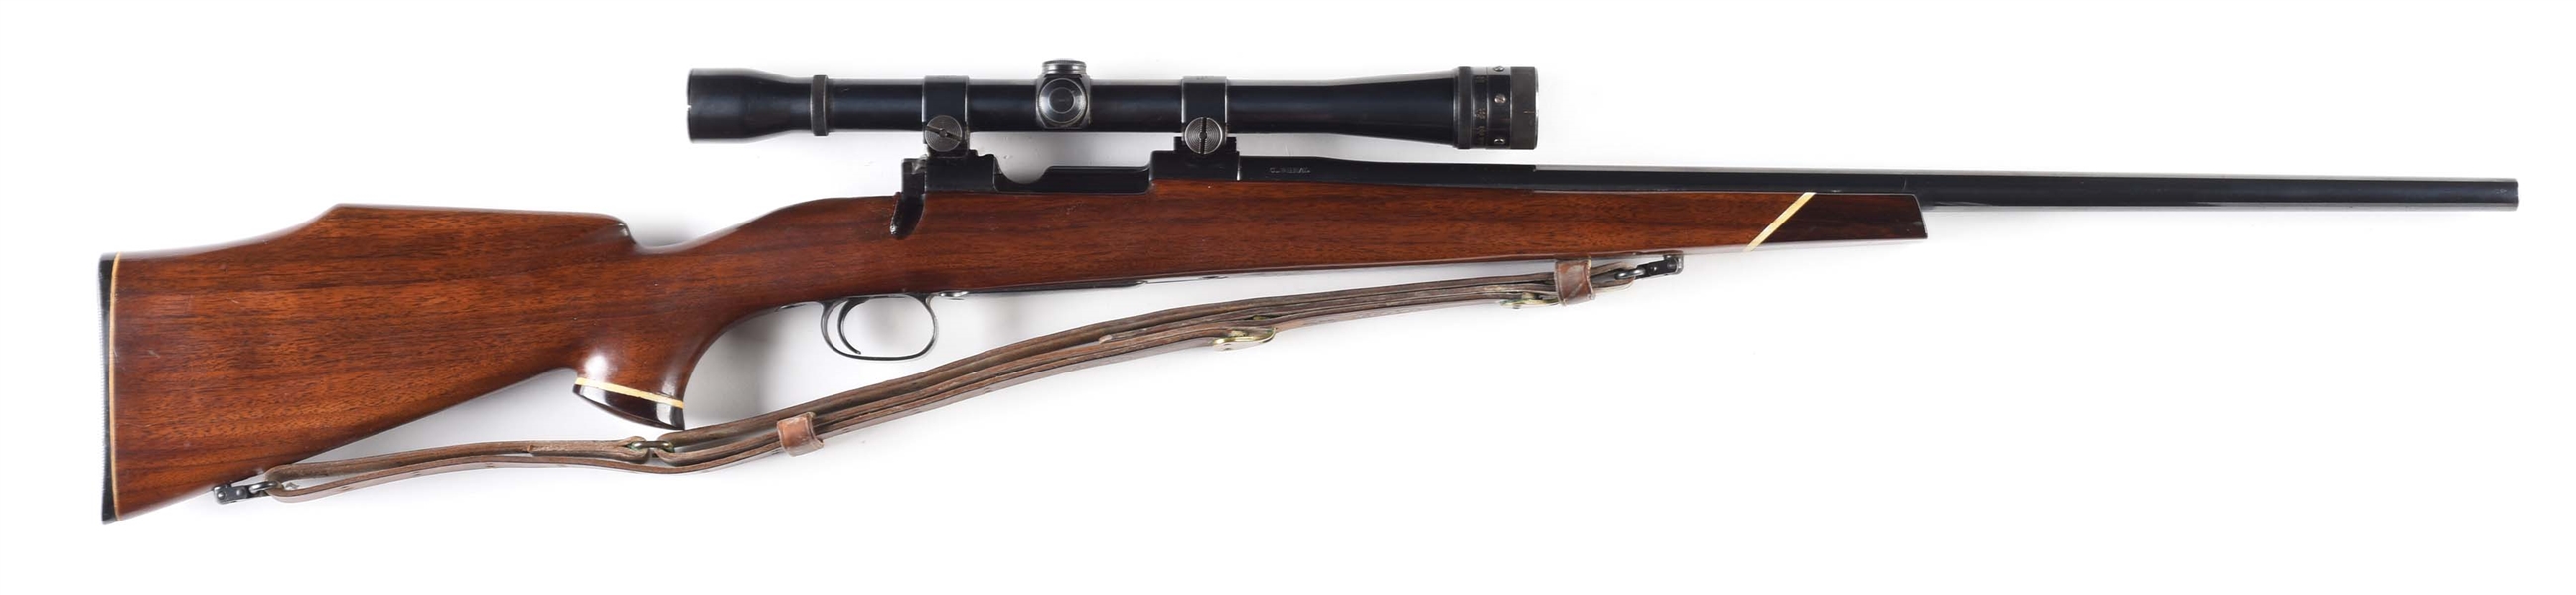 (C) SPORTERIZED MEXICAN MODEL 10 MAUSER RIFLE WITH SCOPE. 